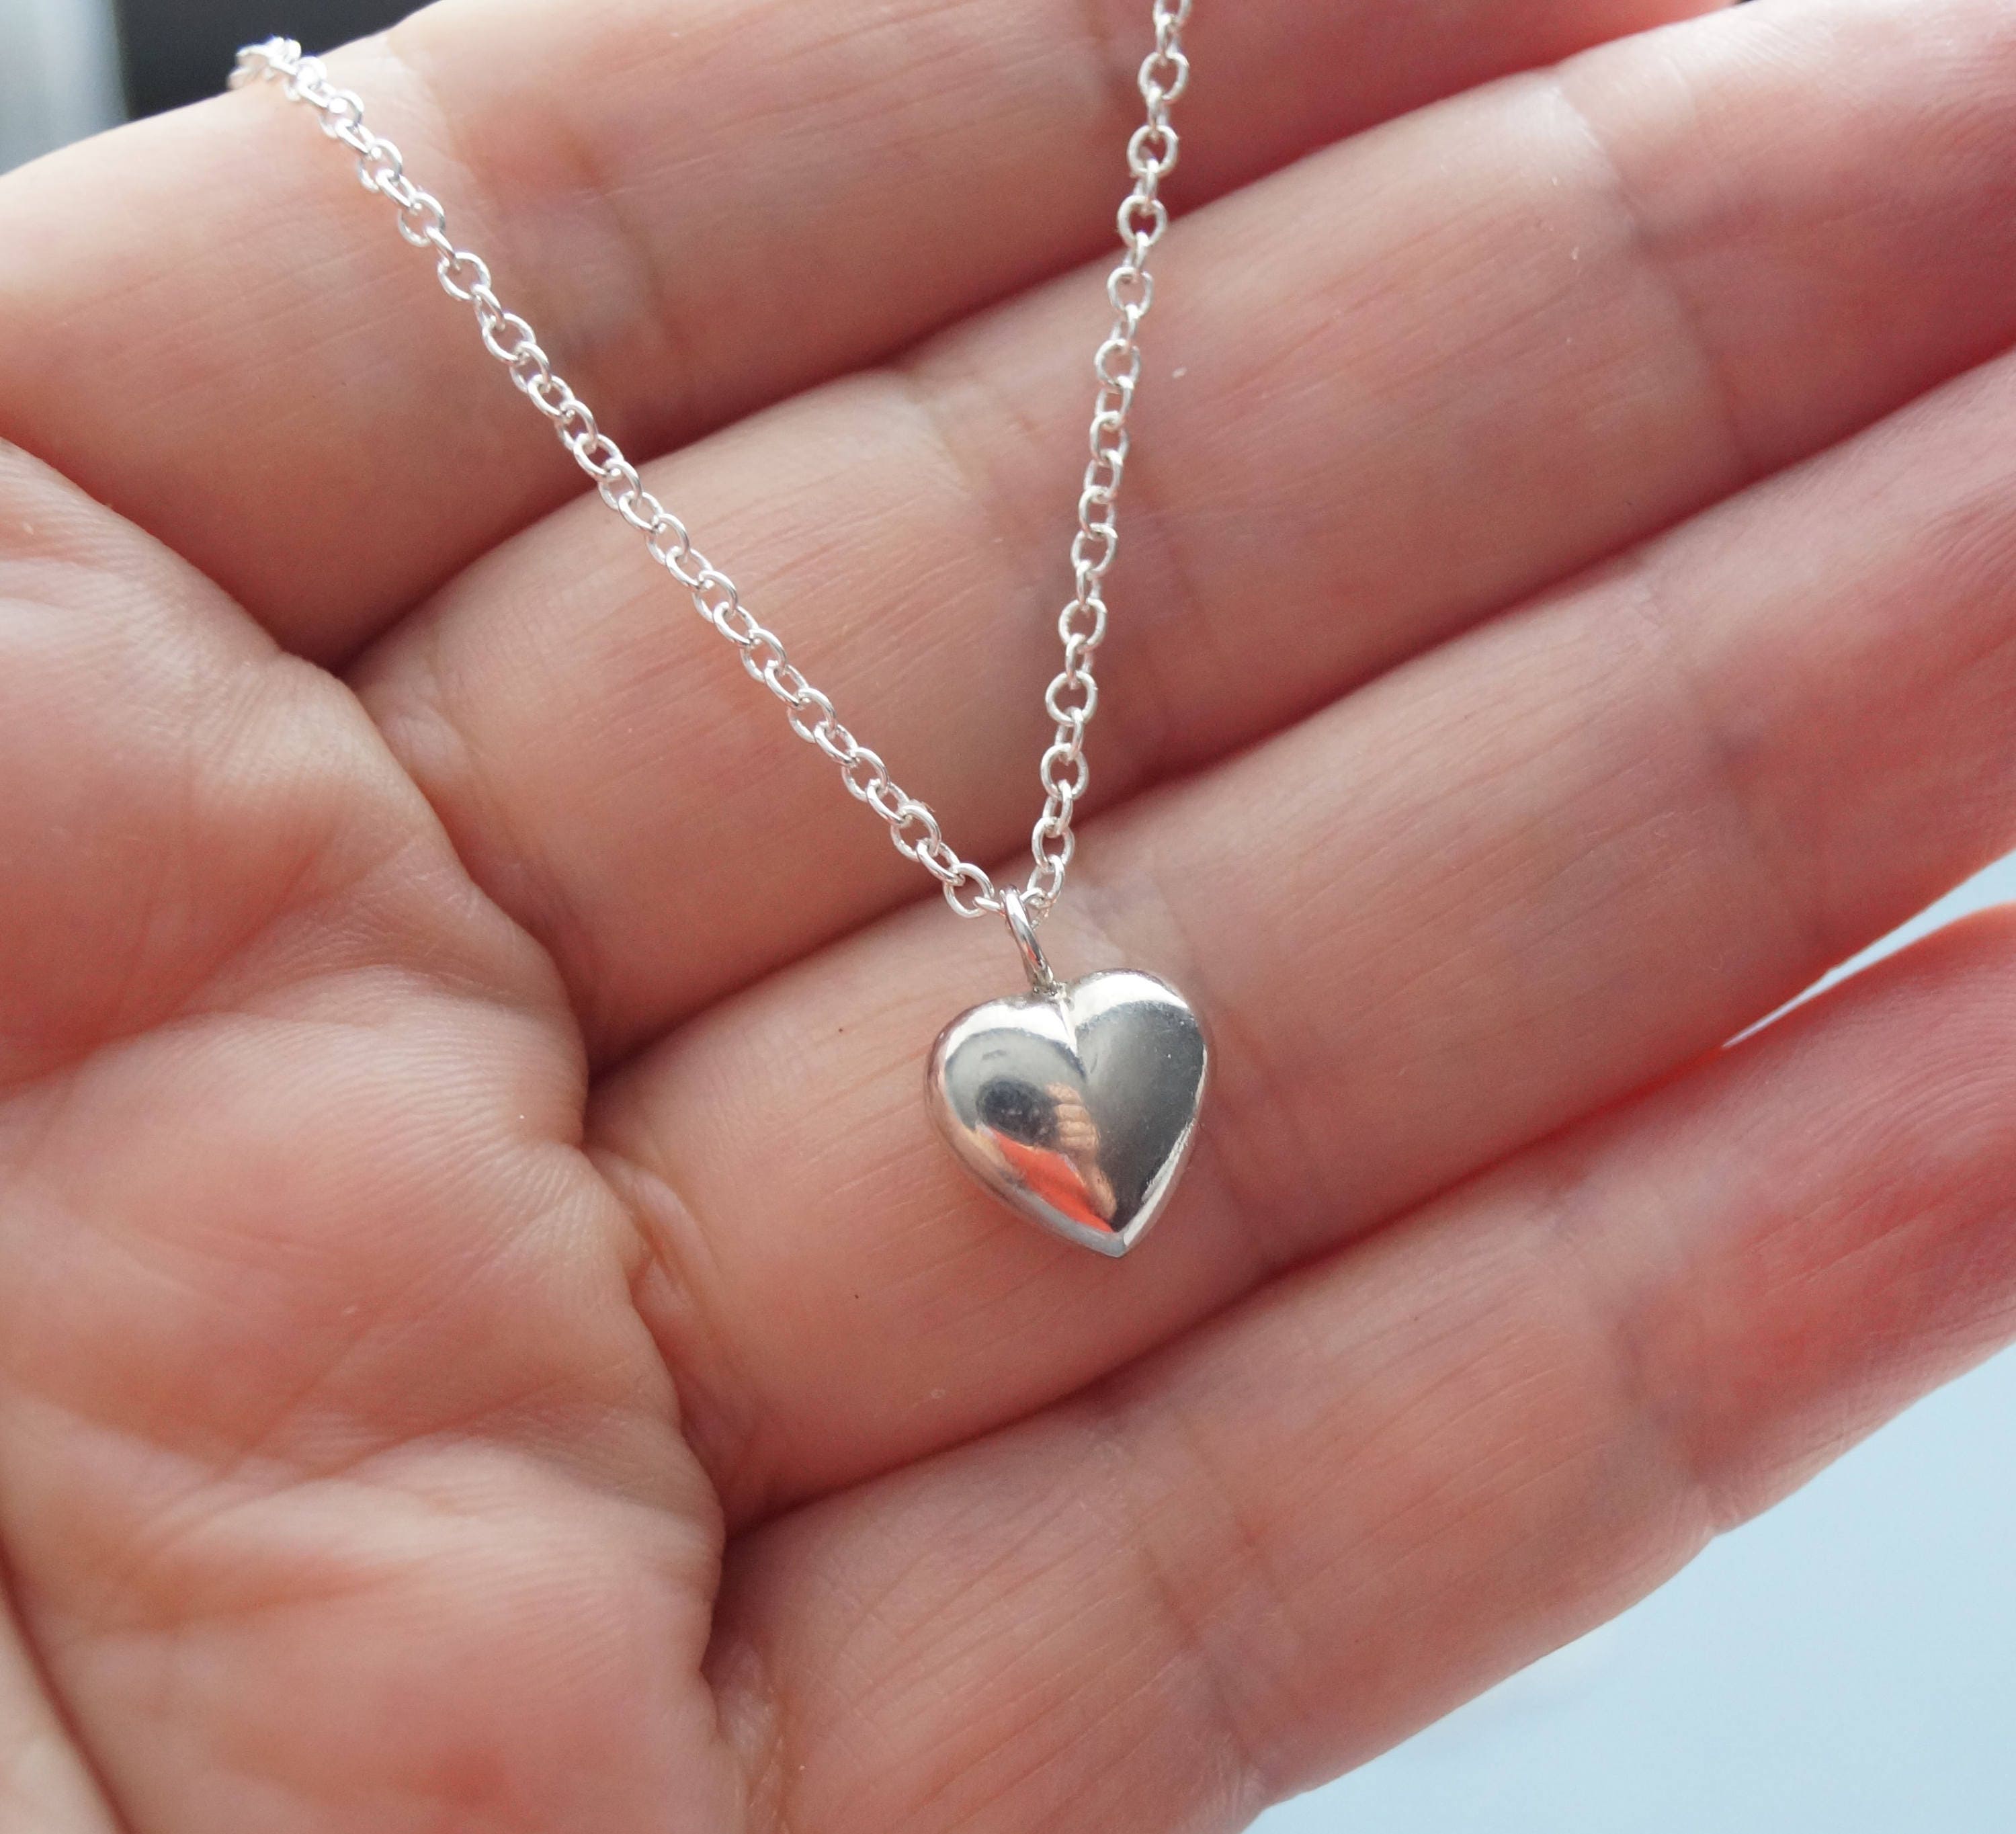 Silver Puff Heart Necklace, Sterling Heart Charm Necklace, Teeny